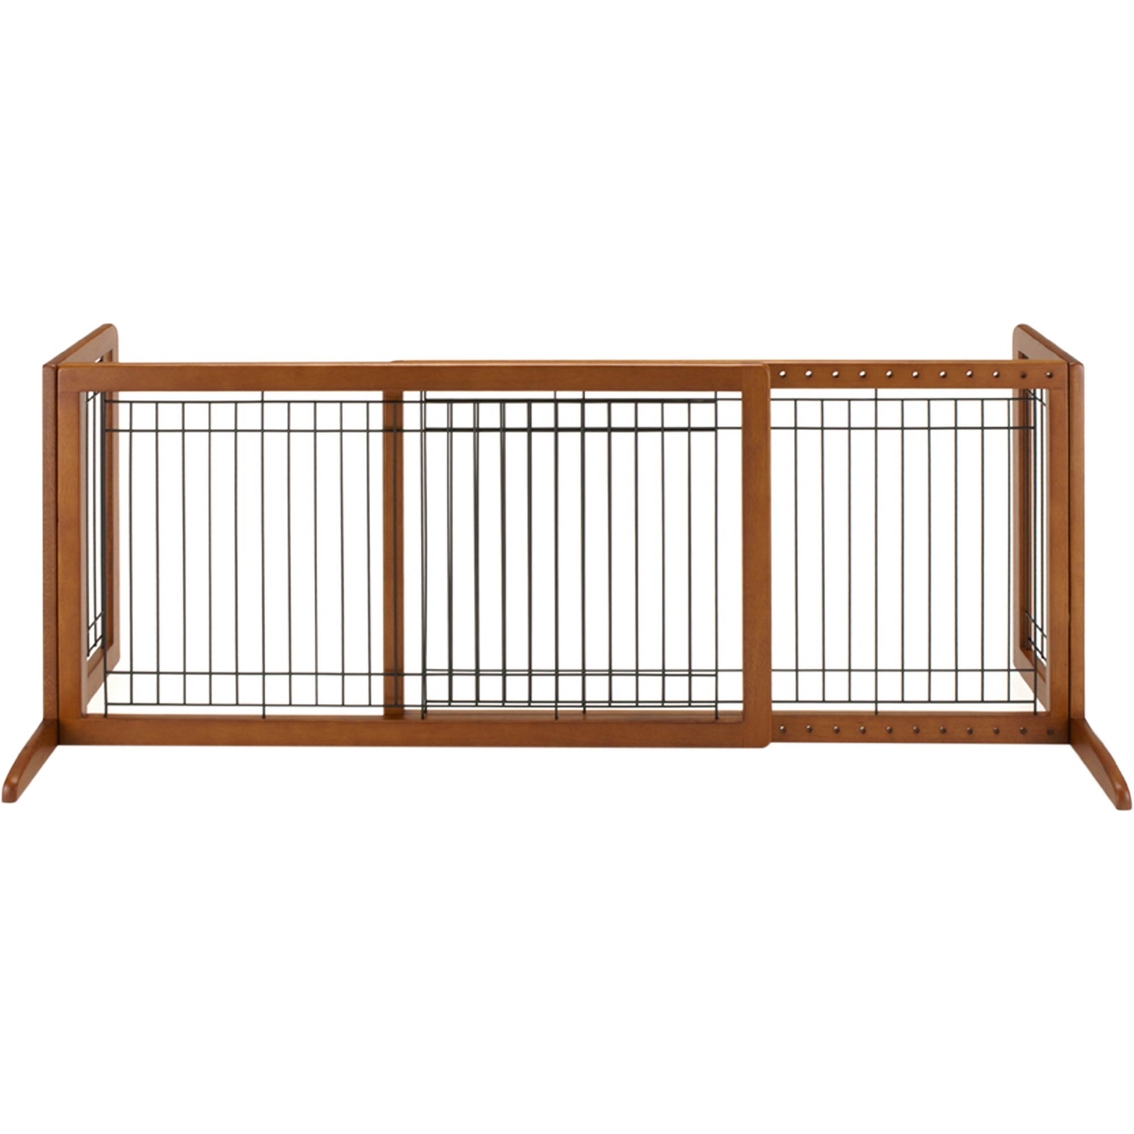 Richell Expandable Freestanding Gate - Image 2 of 3